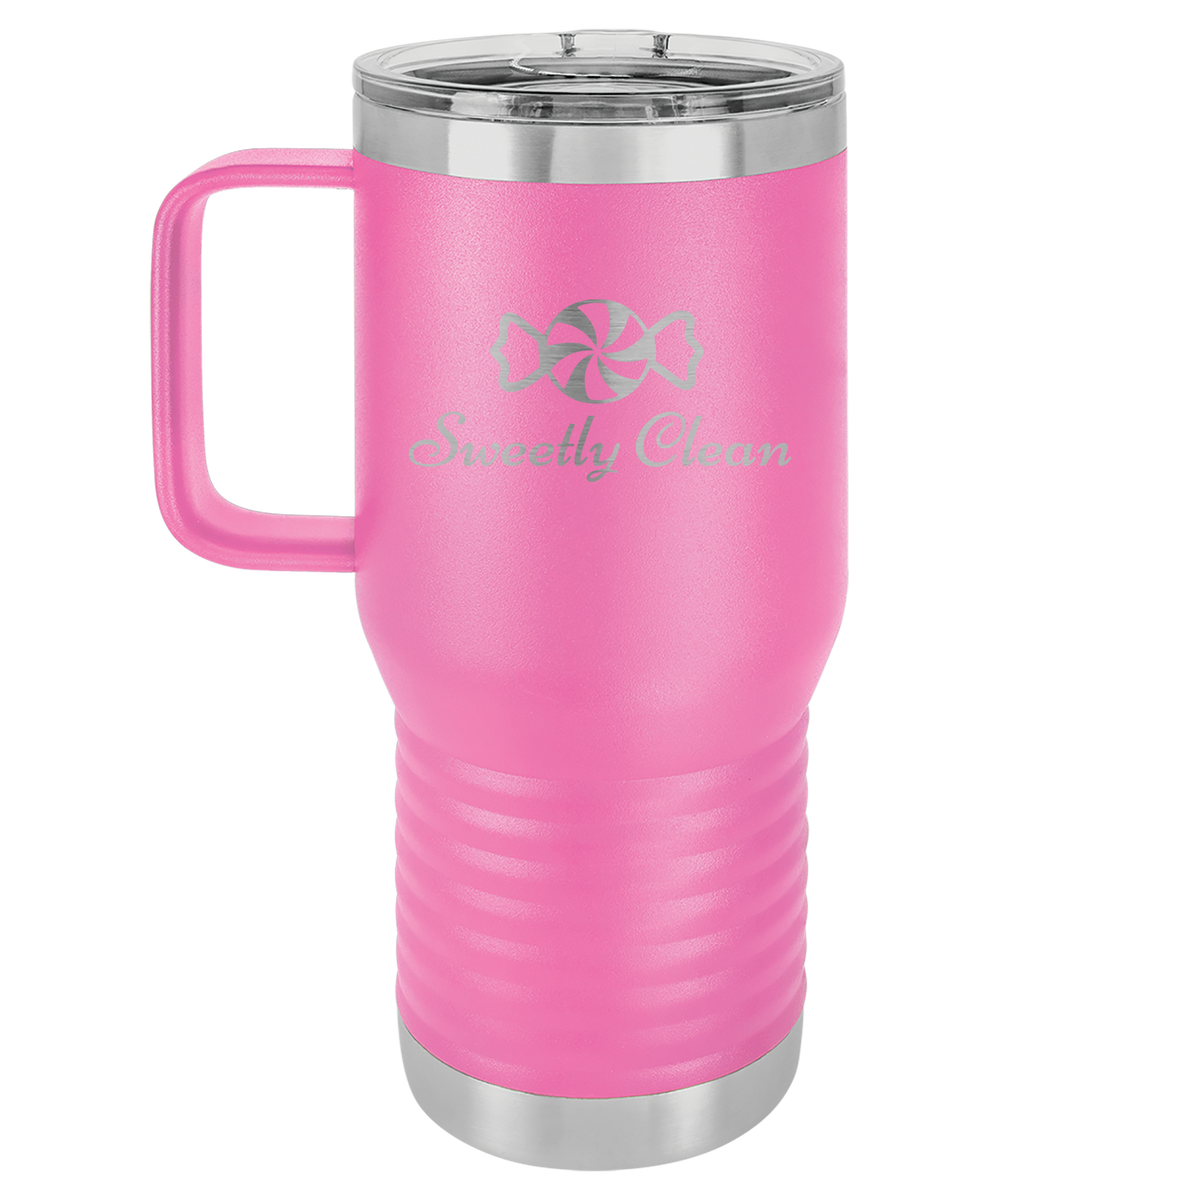 Breast Cancer Awareness Month 20oz Travel Mug - 10$ Donation included.